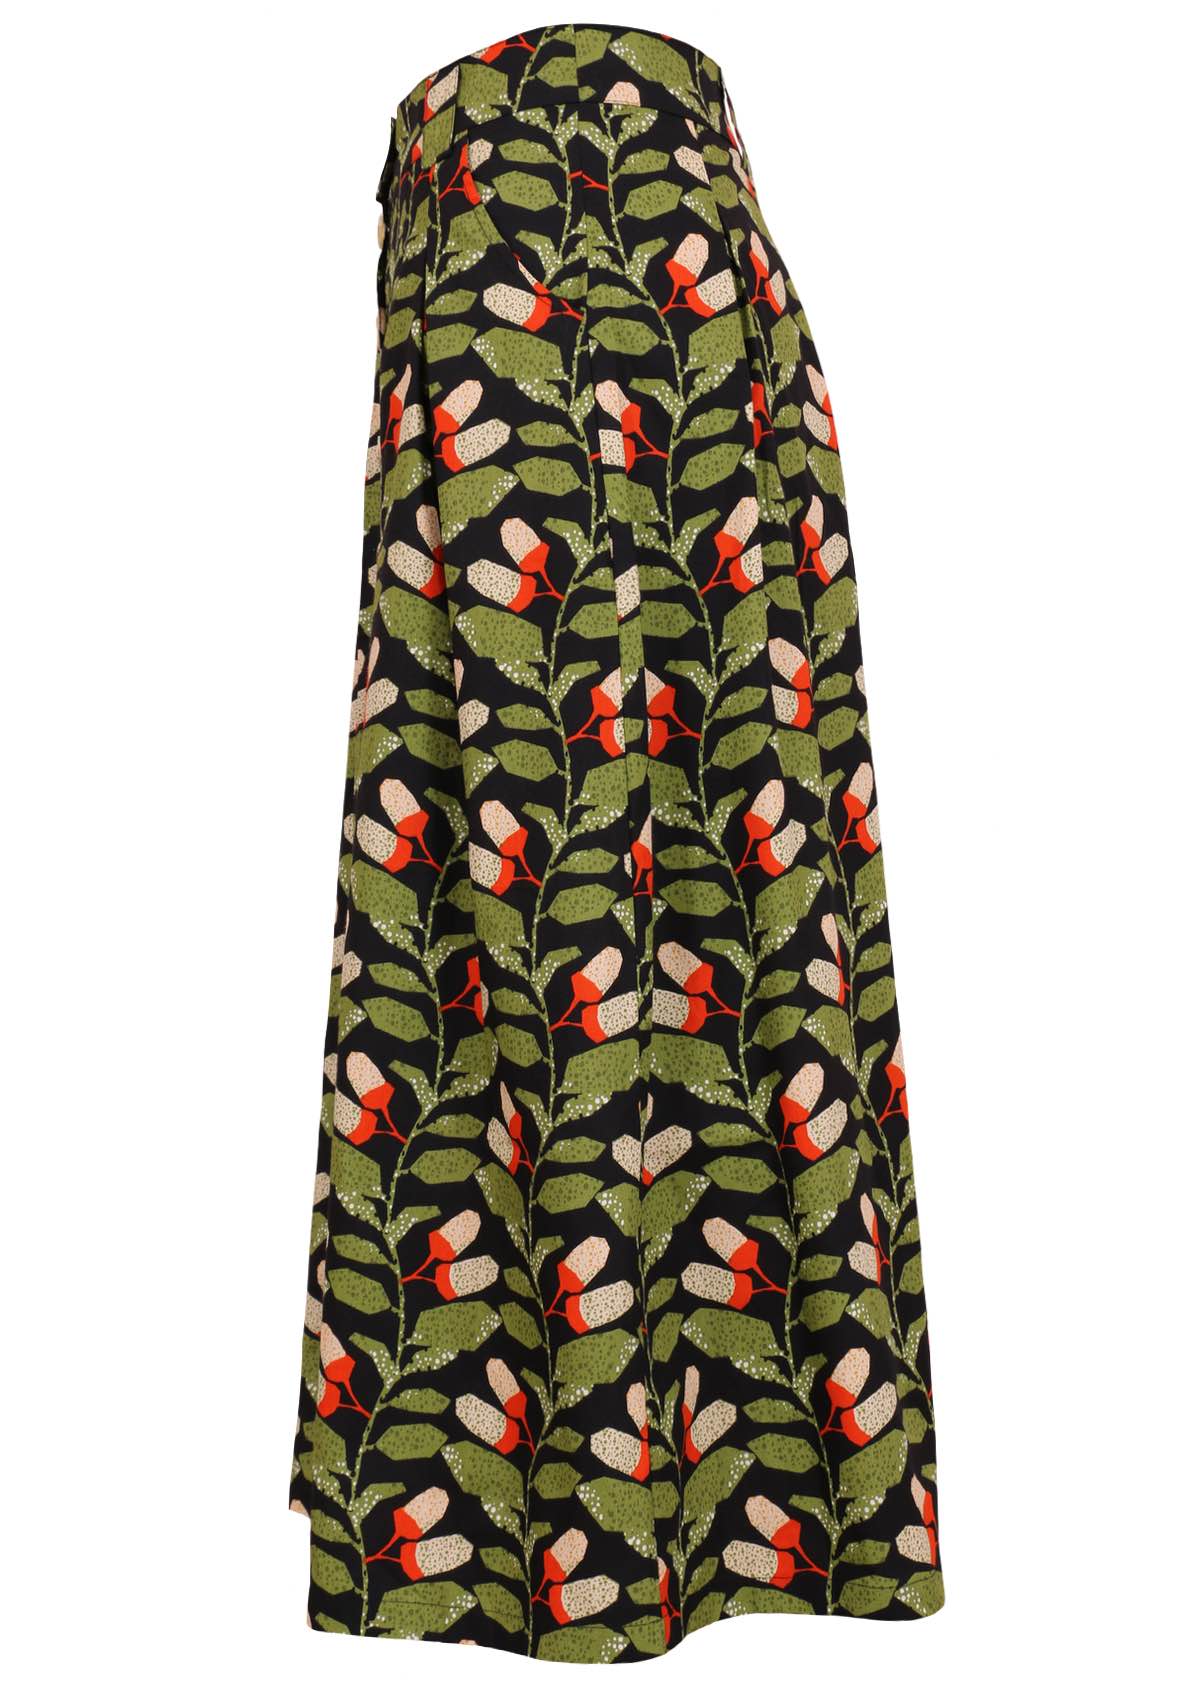 Cora Skirt Oak green and black print cotton mannequin side pic